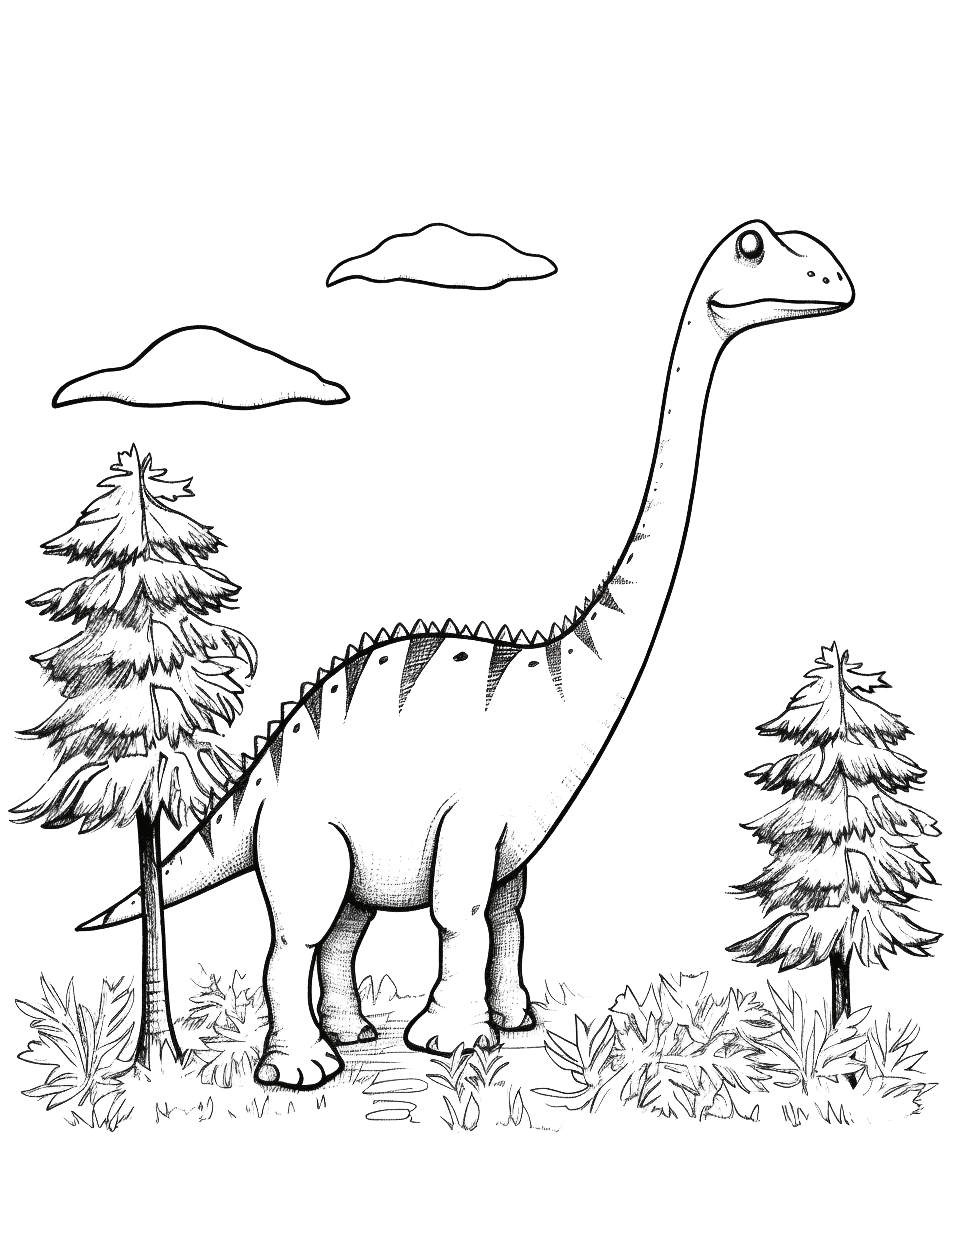 Brachiosaurus Grazing Dinosaur Coloring Page - A Brachiosaurus peacefully grazing on the top of tall trees.